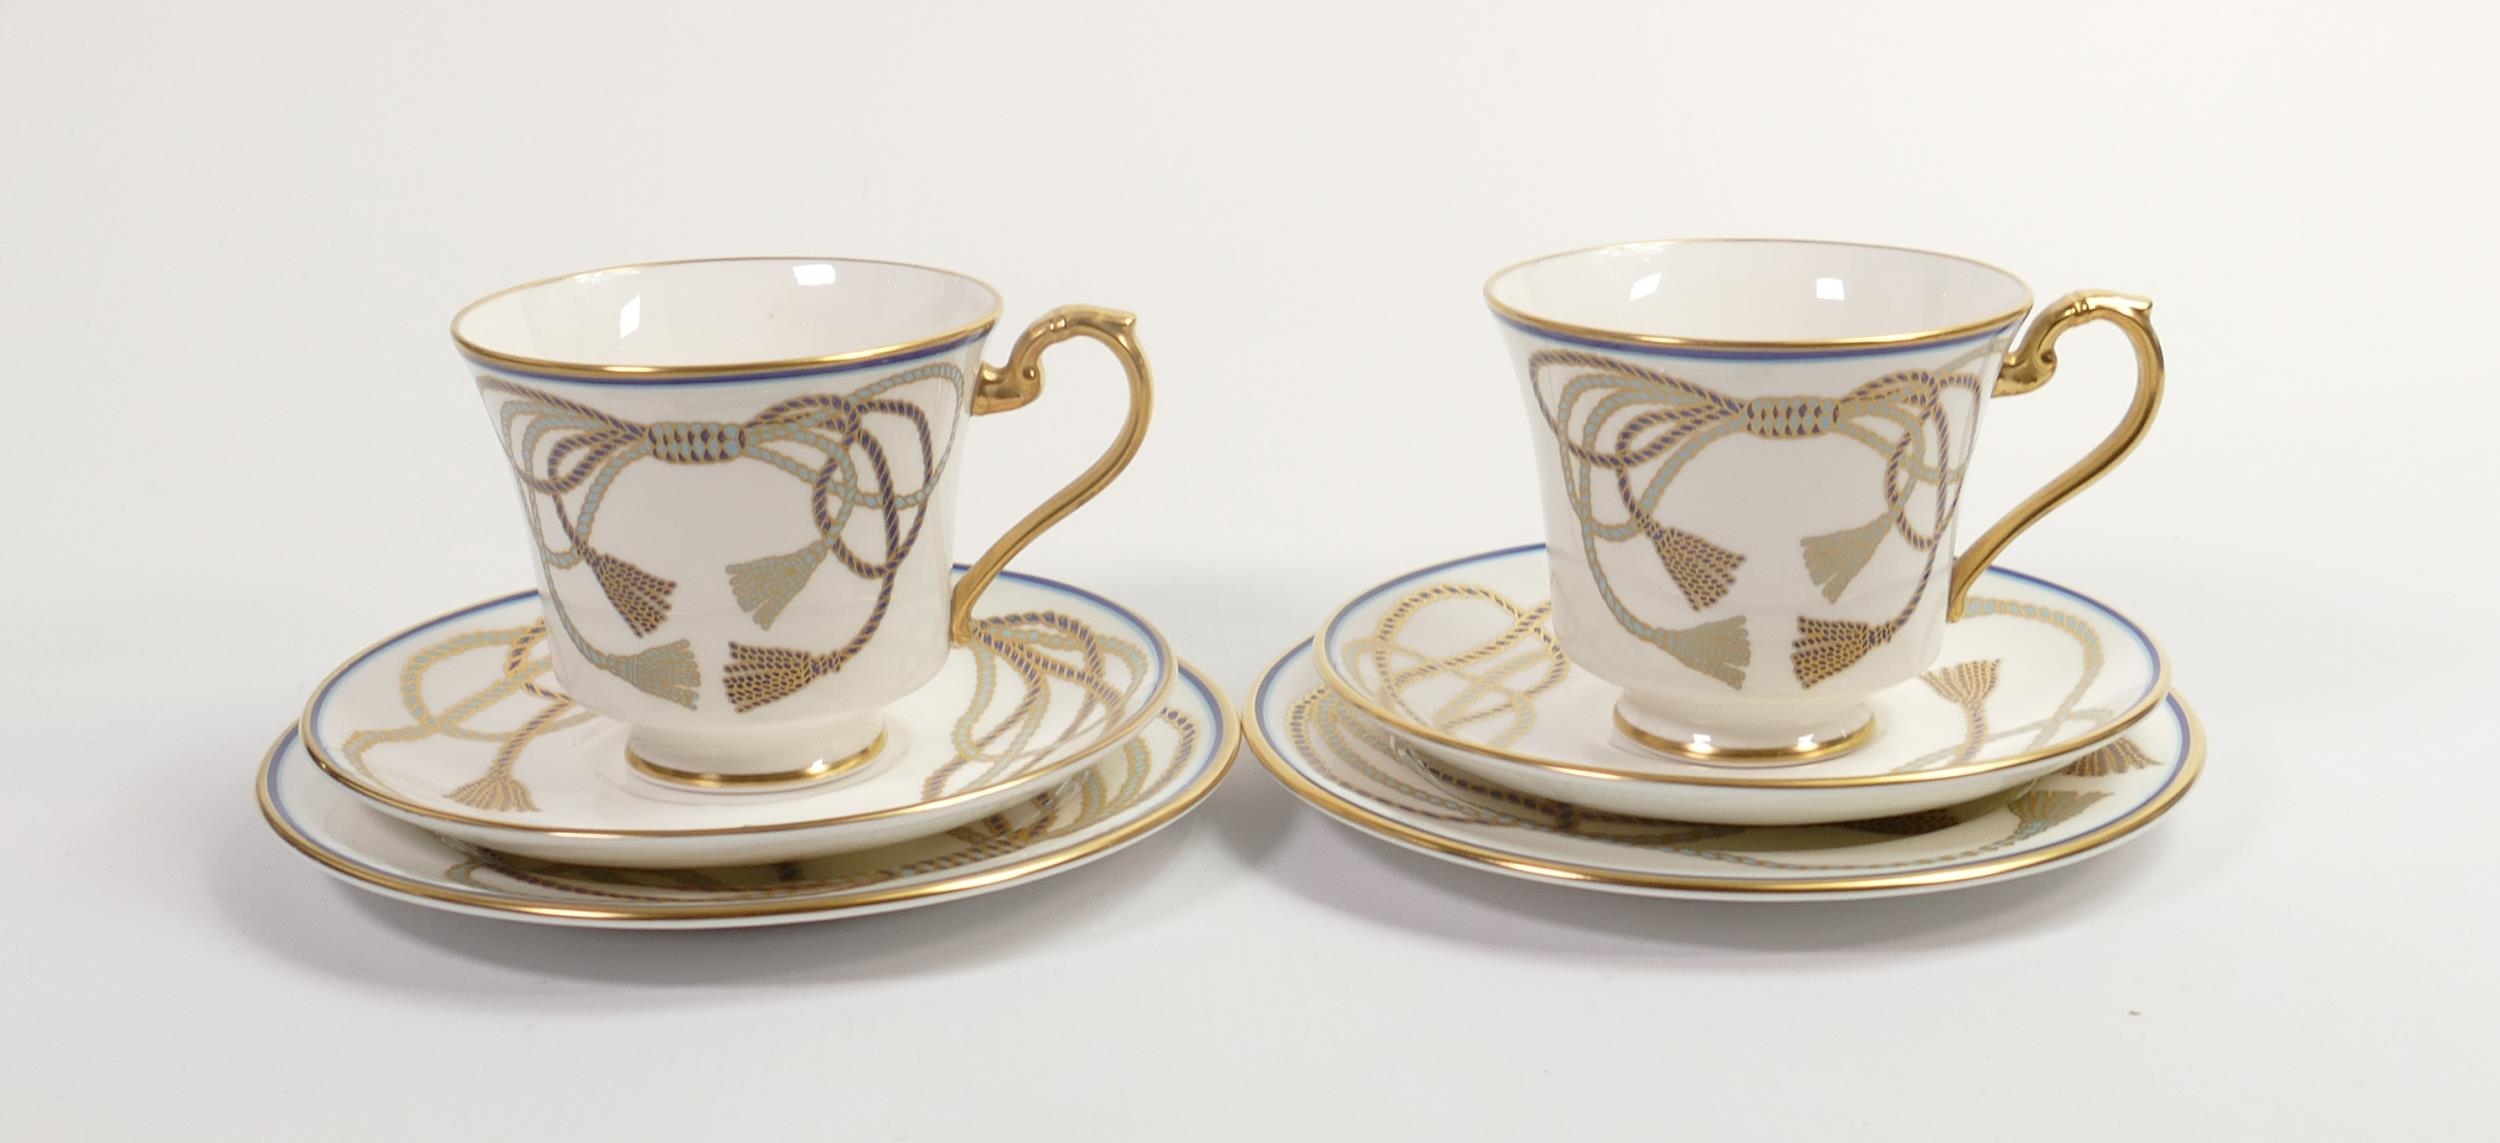 De Lamerie Fine Bone China heavily gilded Twisted Braid patterned Trio's, specially made high end